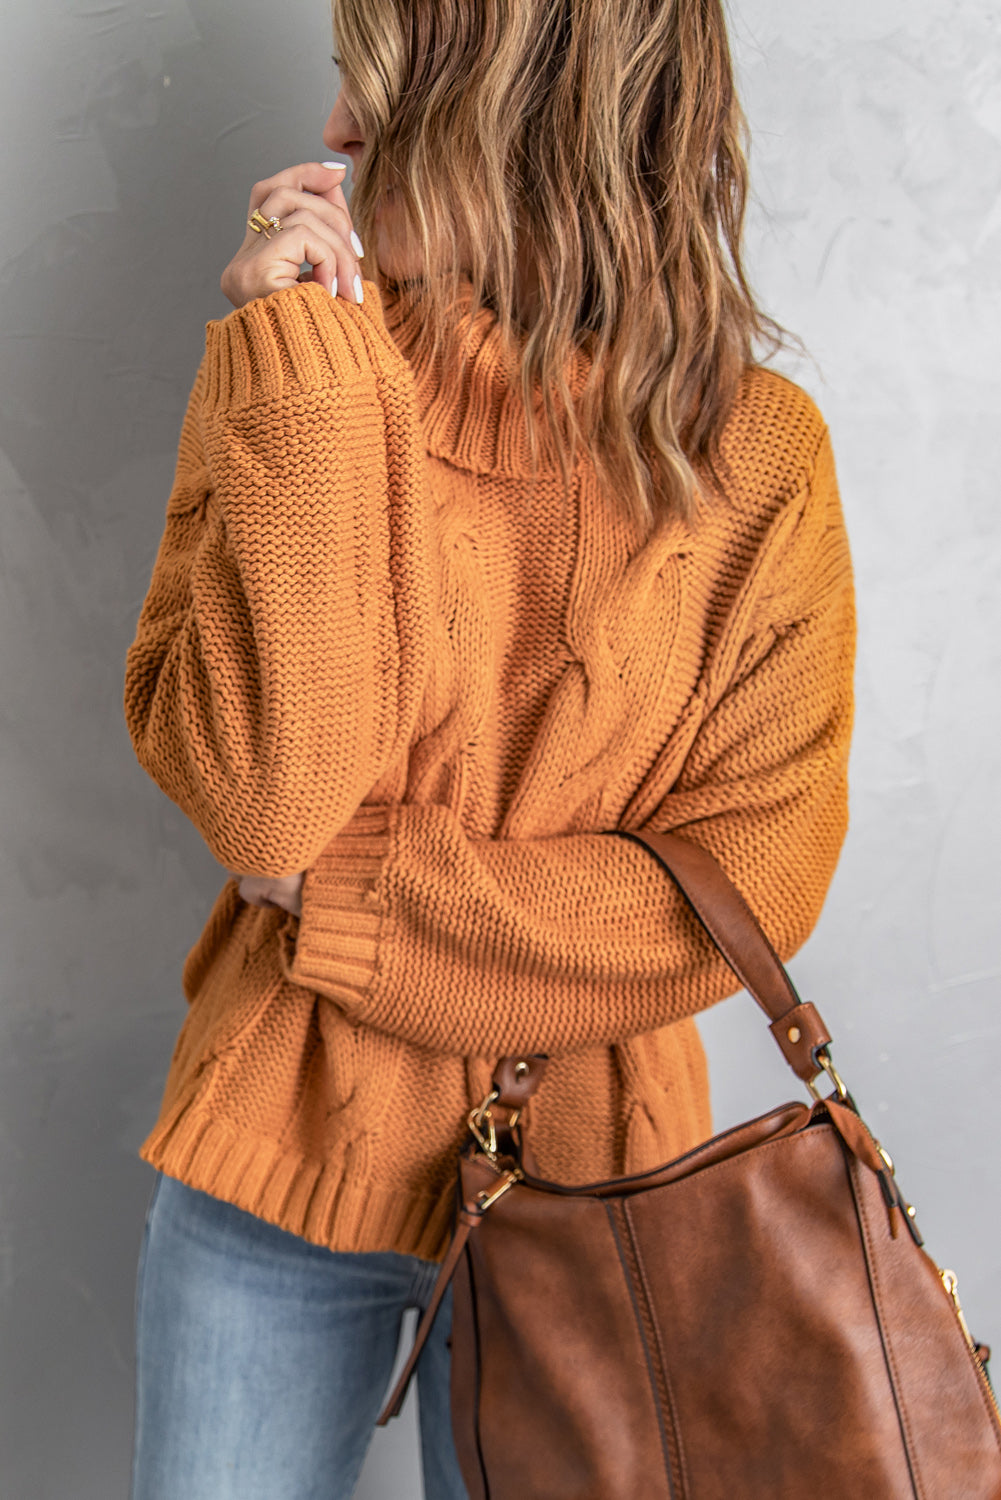 New Yellow Handmade Cable Knit Turtleneck Sweater